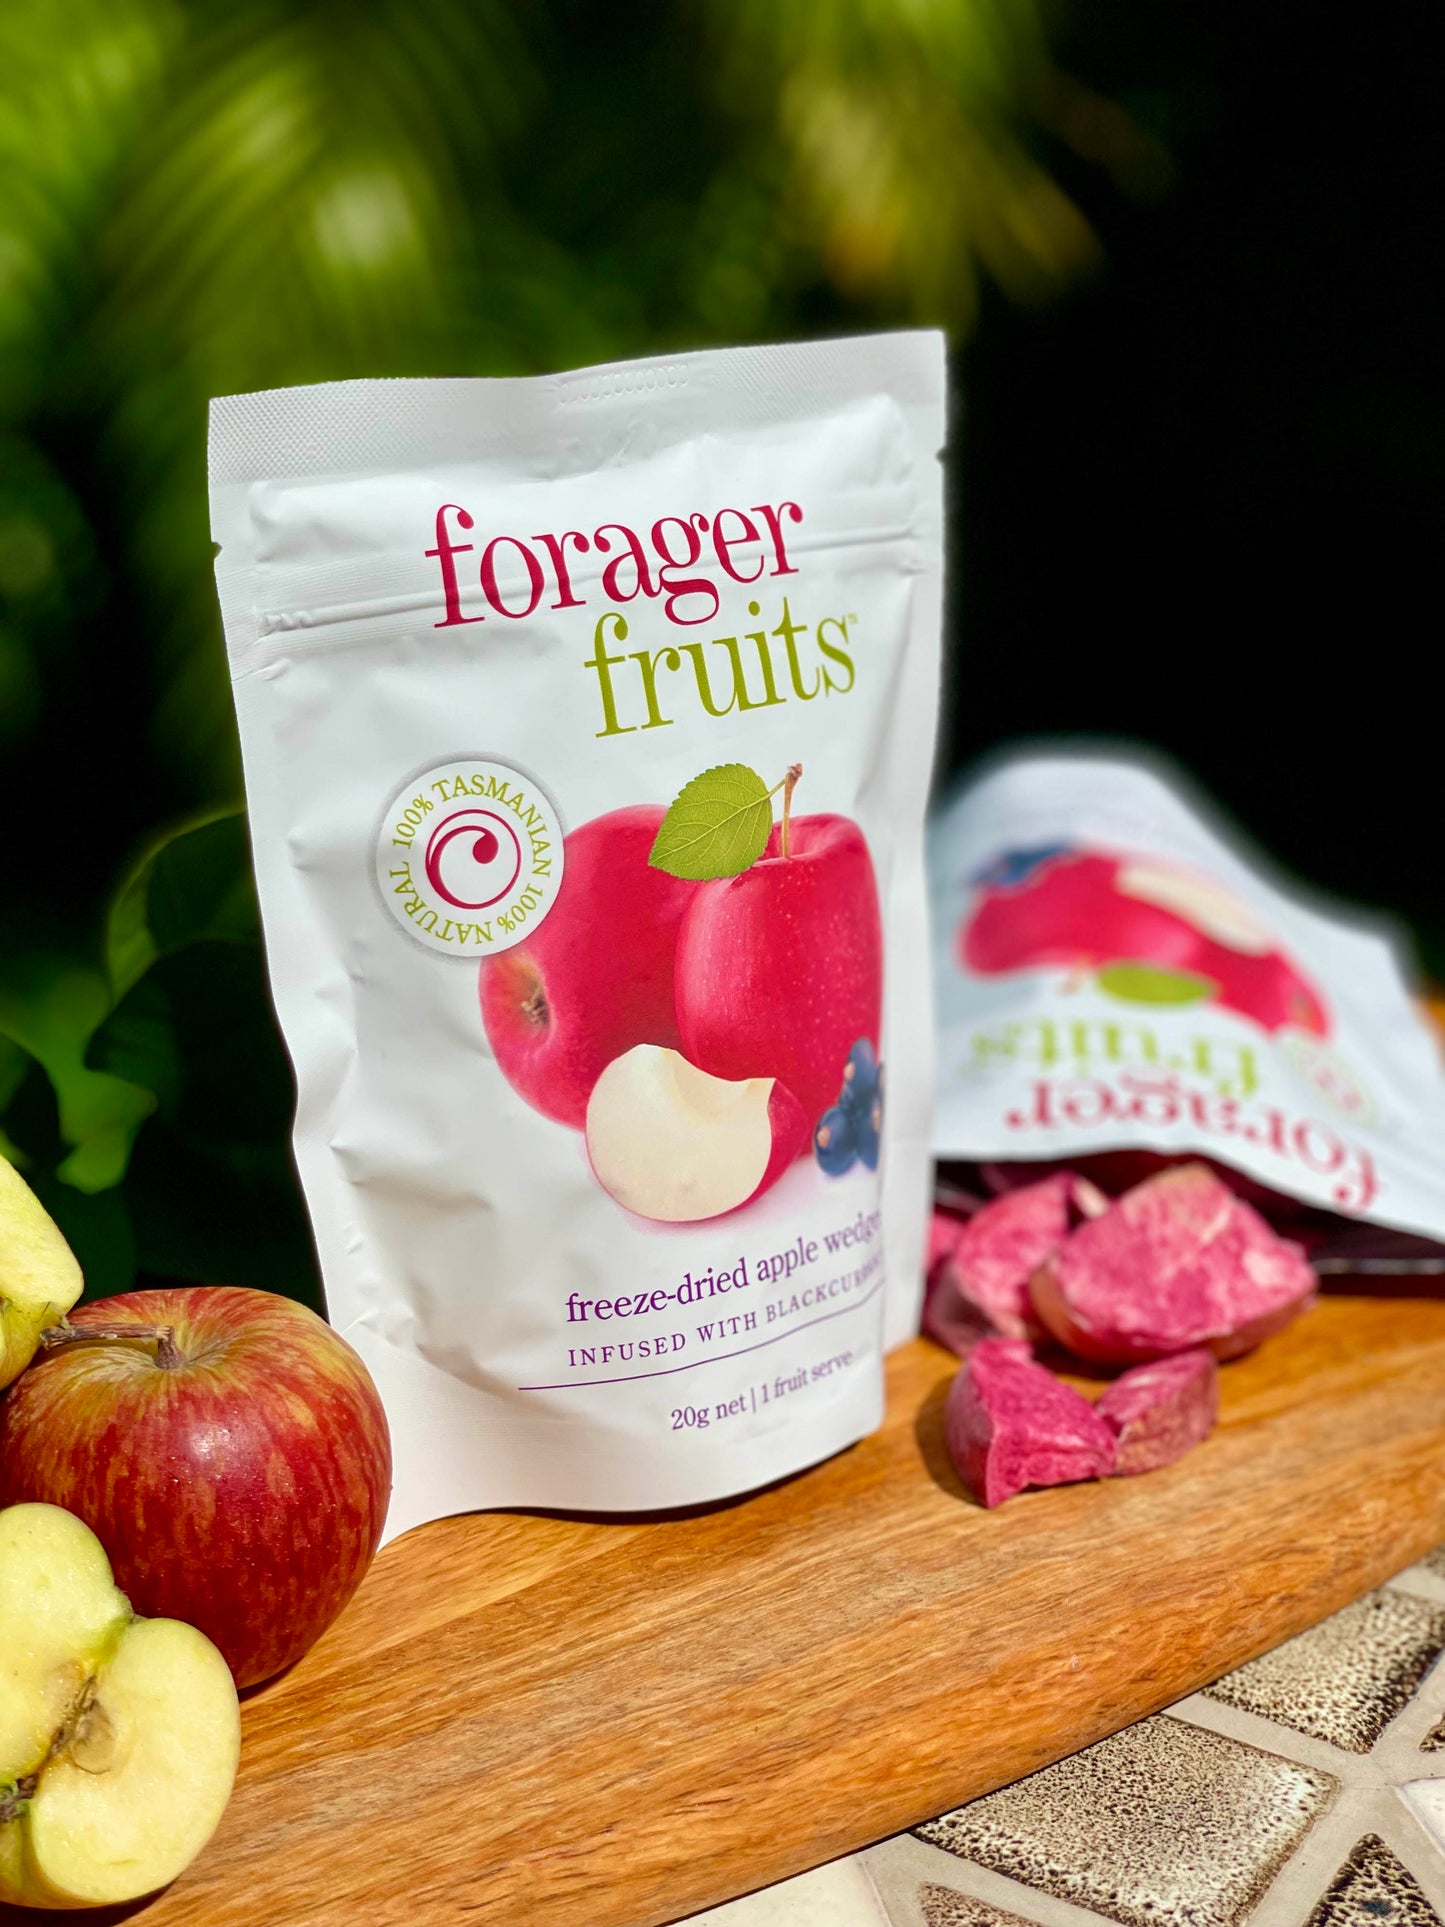 Forager Freeze Dried Apple Wedges infused with Blackcurrant